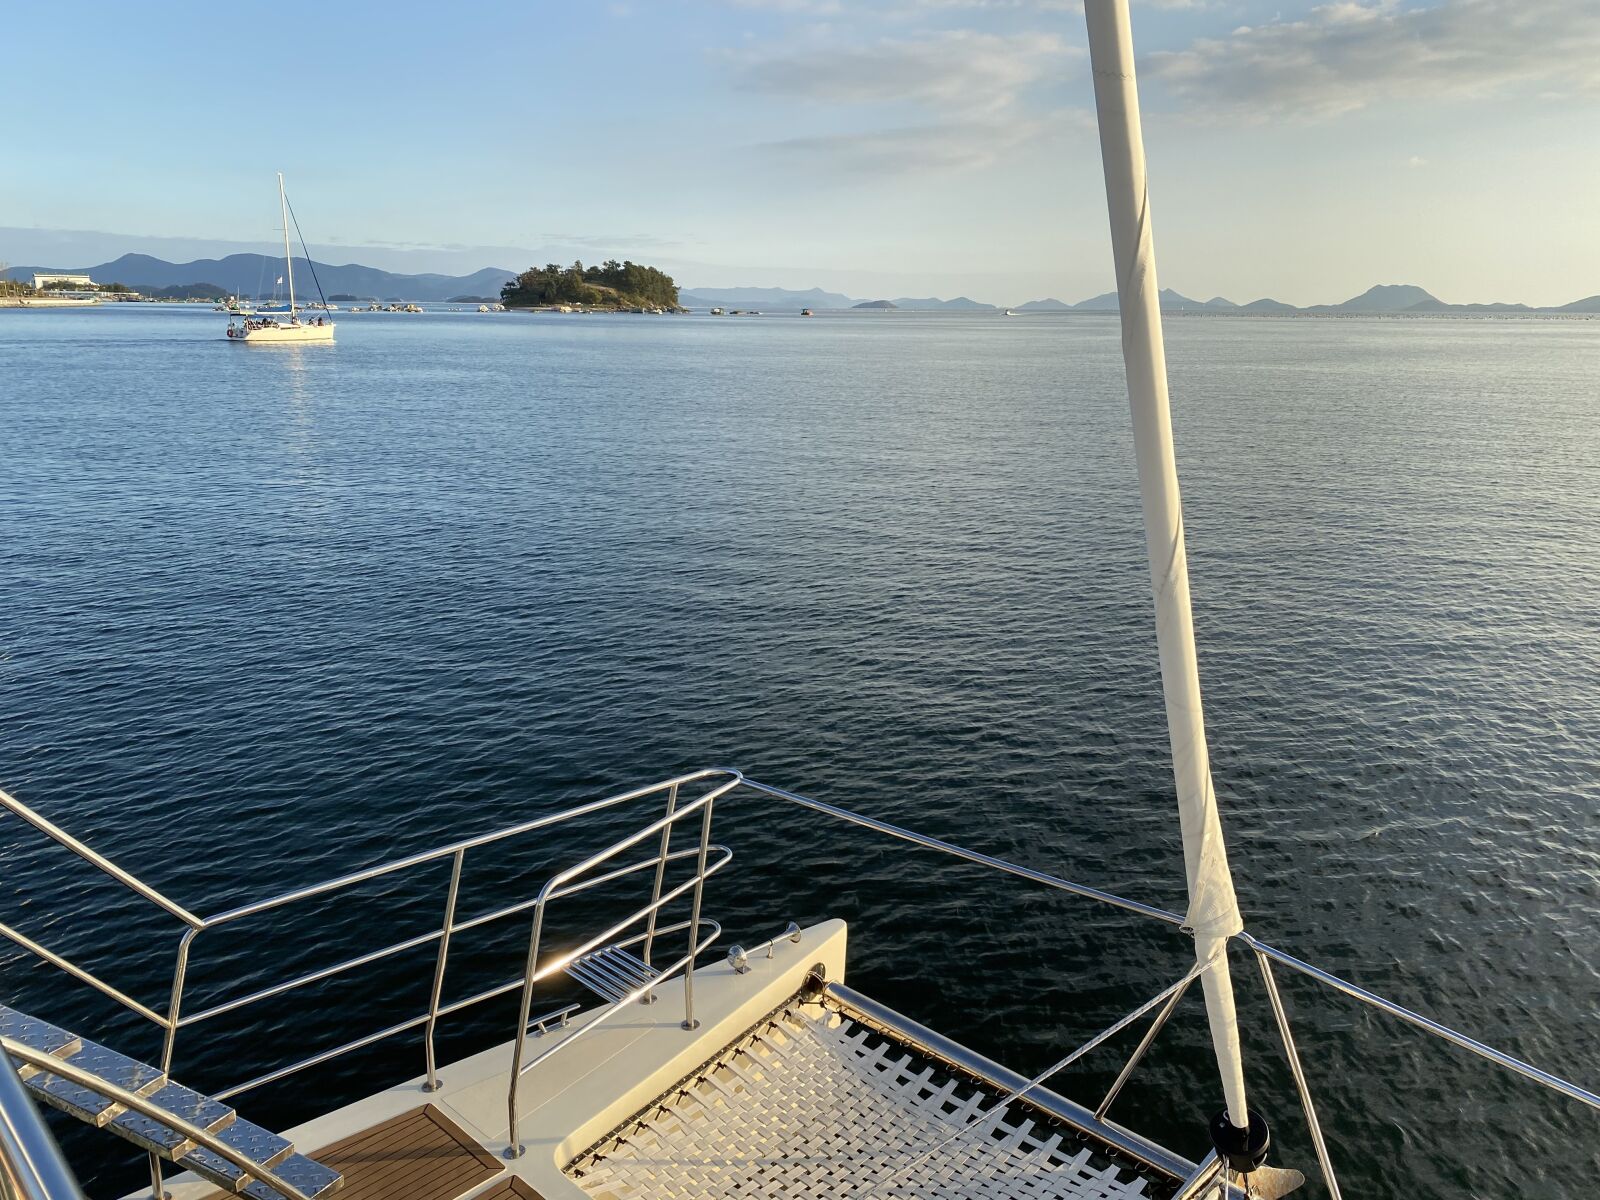 Apple iPhone 11 + iPhone 11 back dual wide camera 4.25mm f/1.8 sample photo. Sea, boat, yacht photography